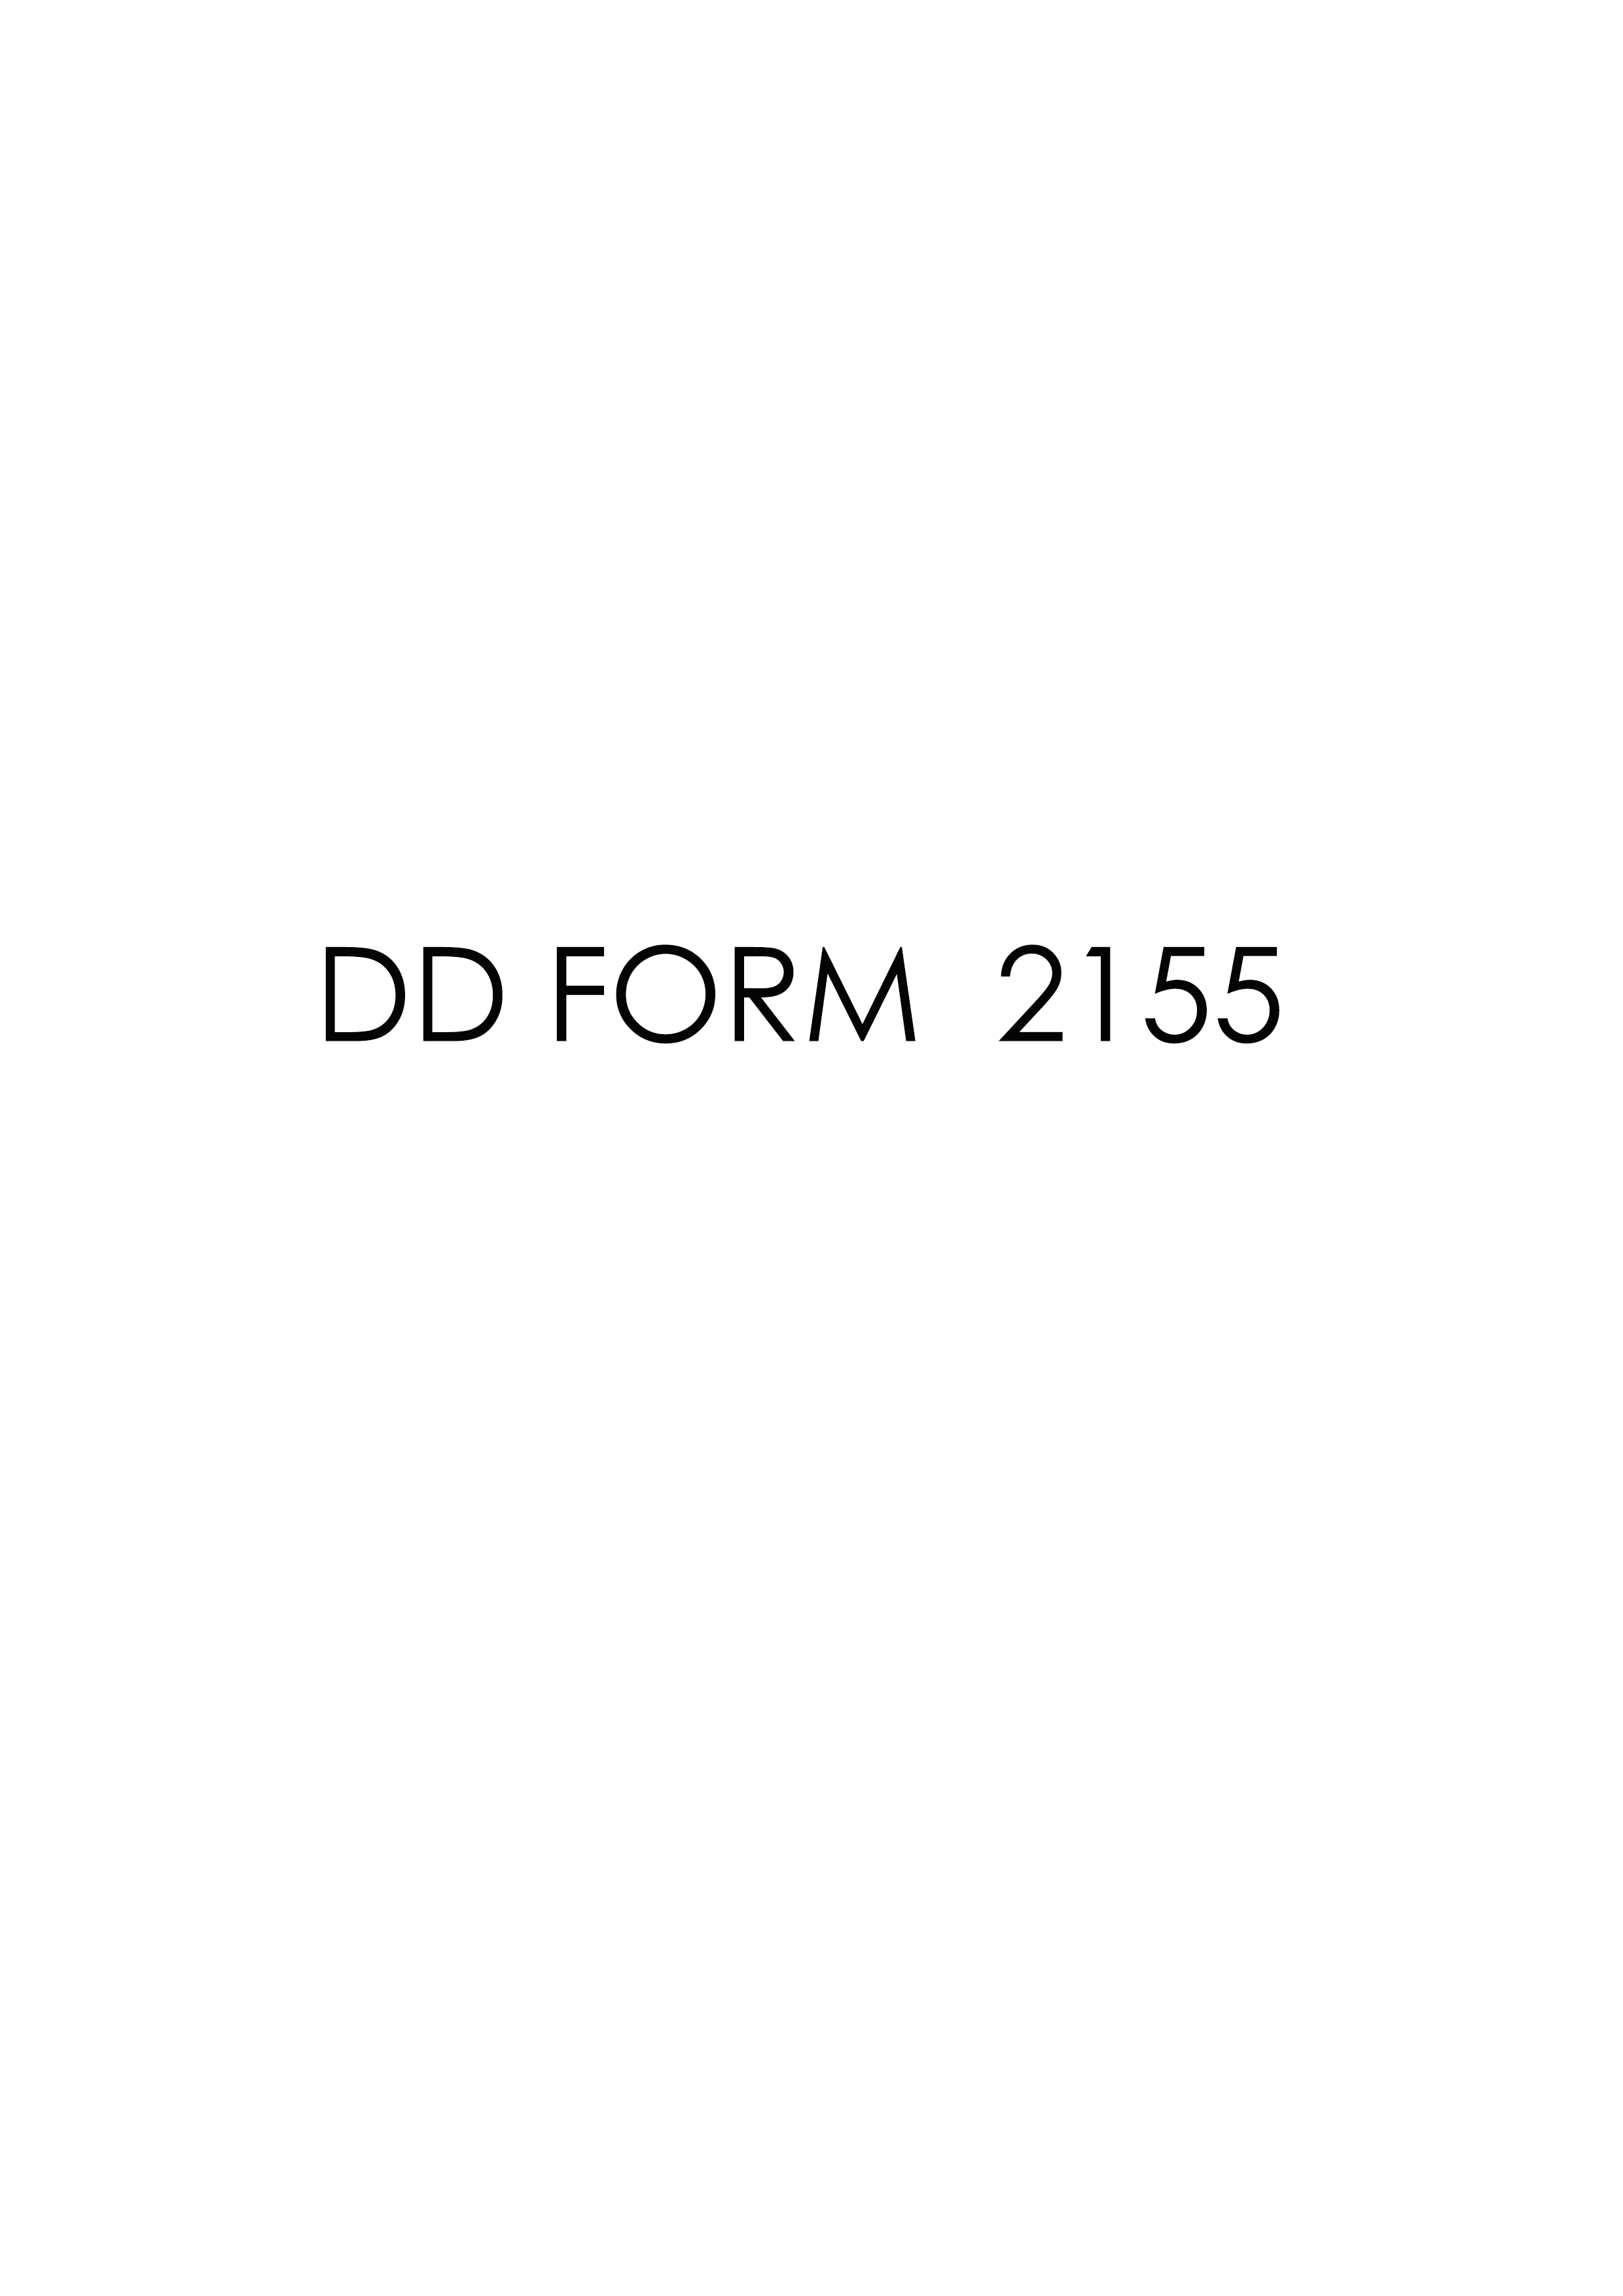 Download Fillable dd Form 2155